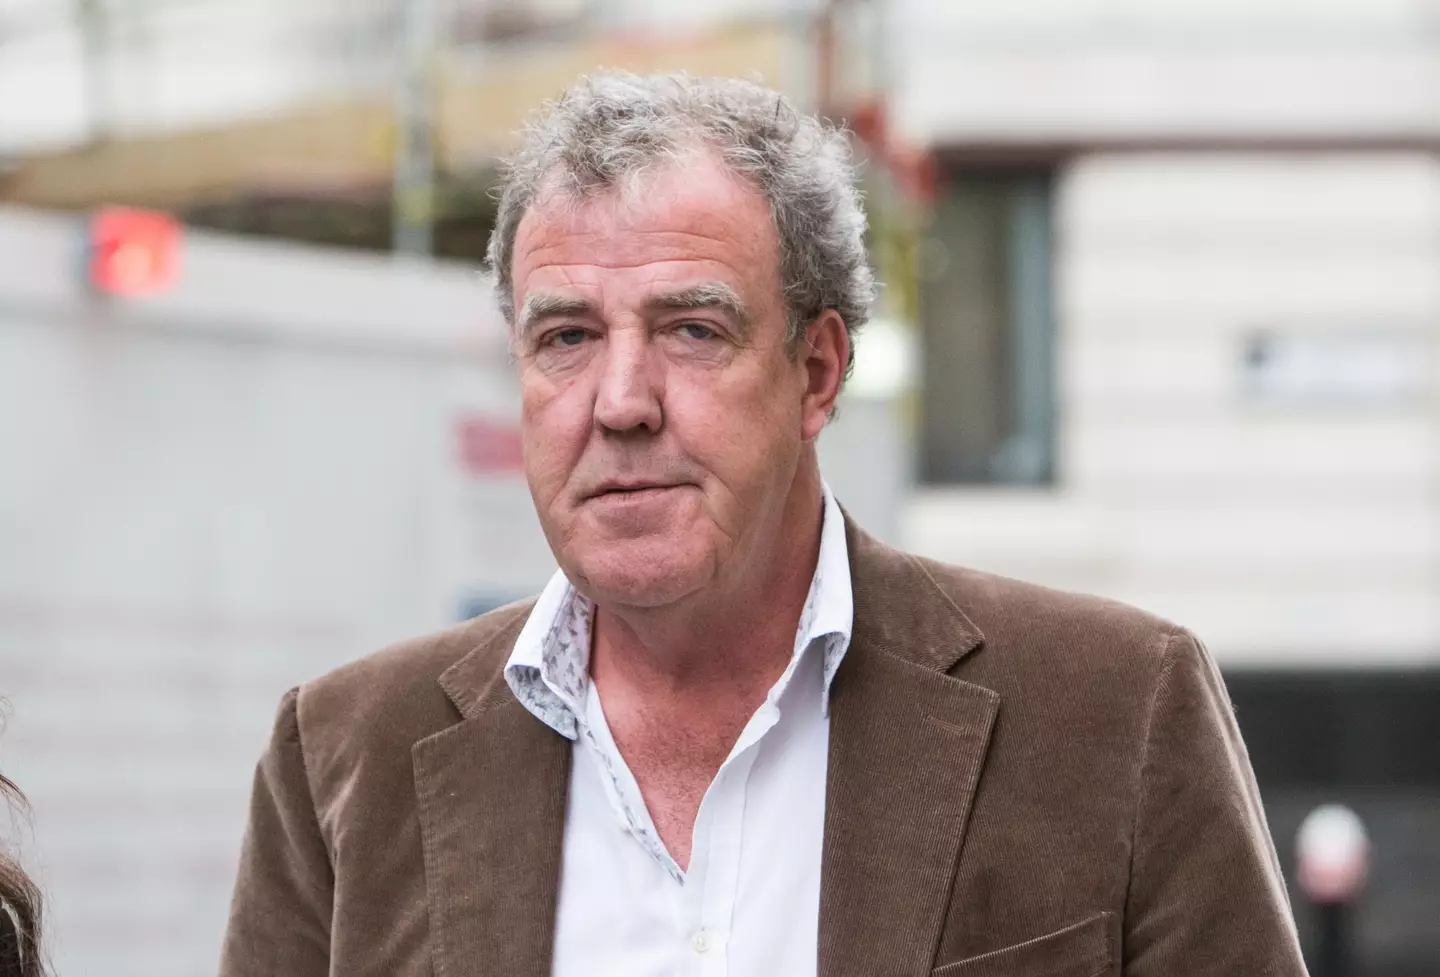 Clarkson seemingly had a dig at the British government’s response to the heatwave.